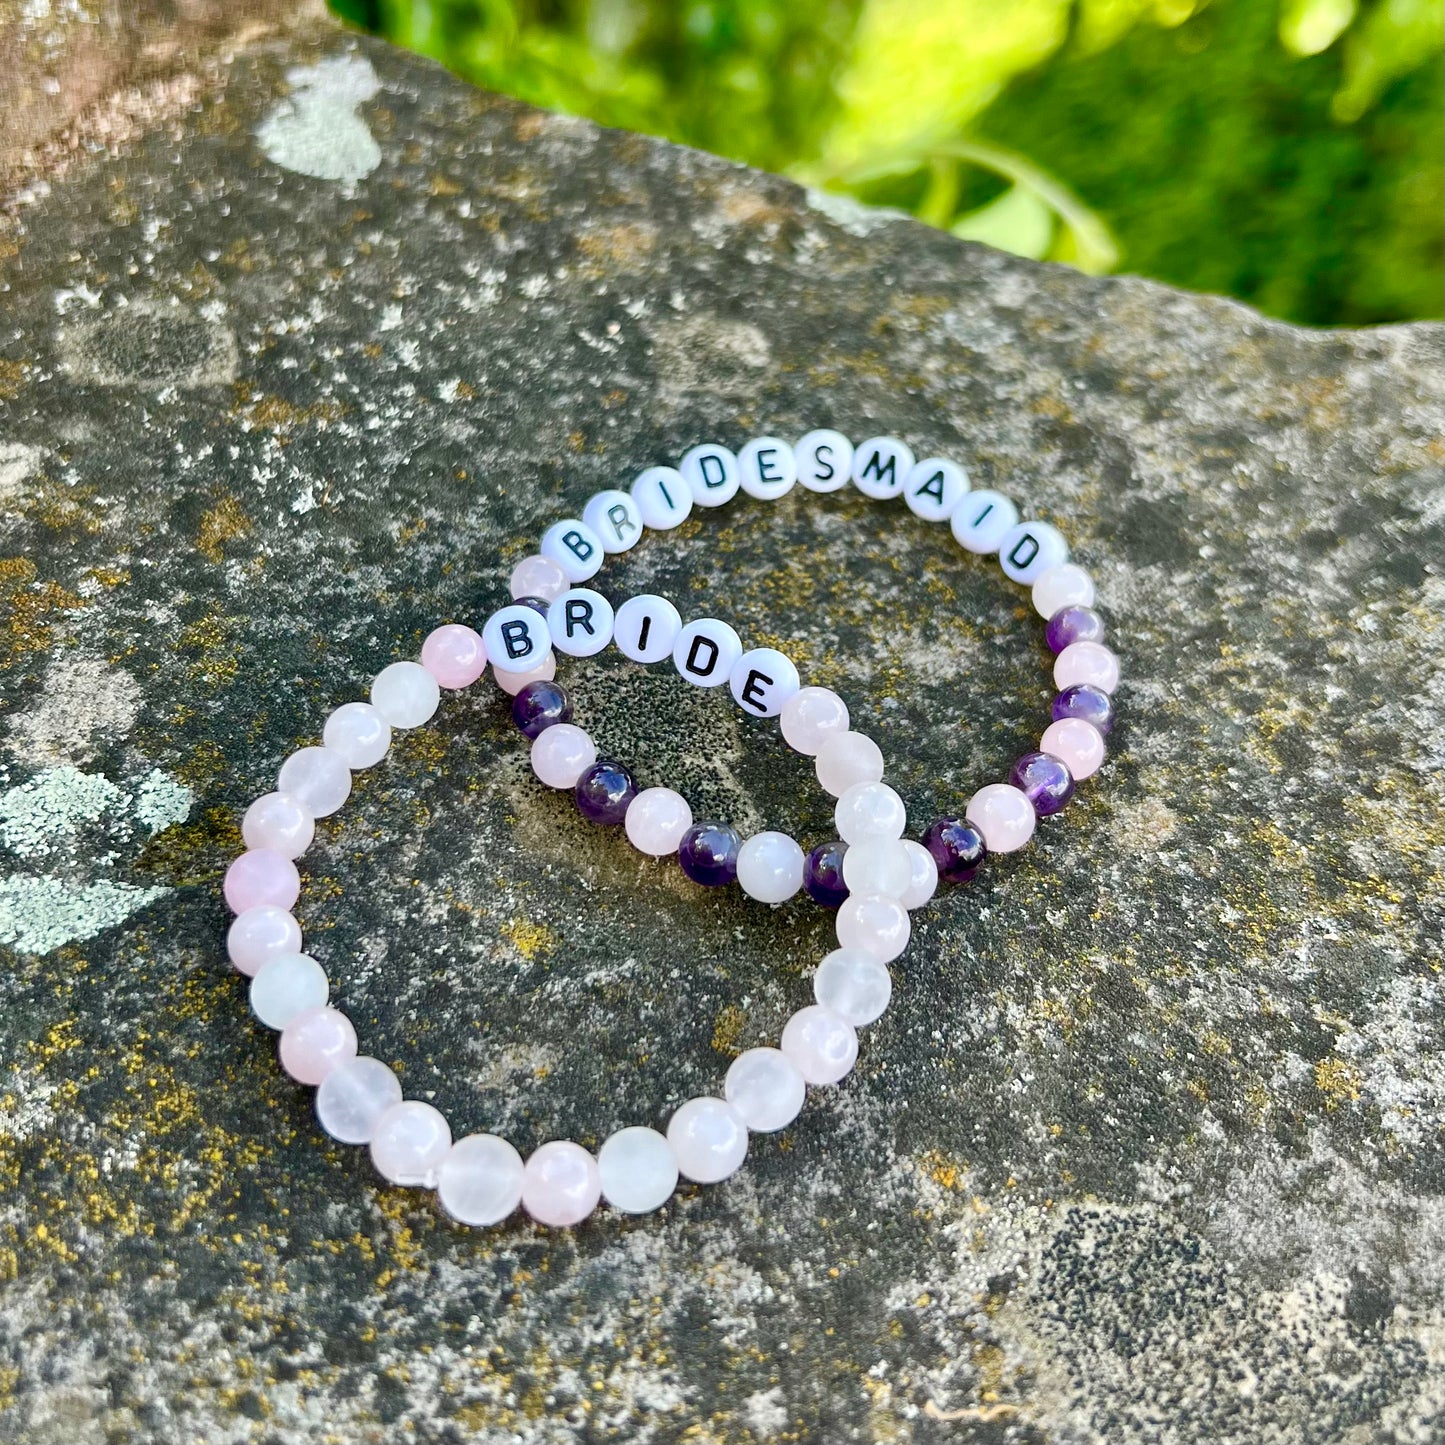 HEALING STONES OF YOUR CHOICE - personalized bracelet